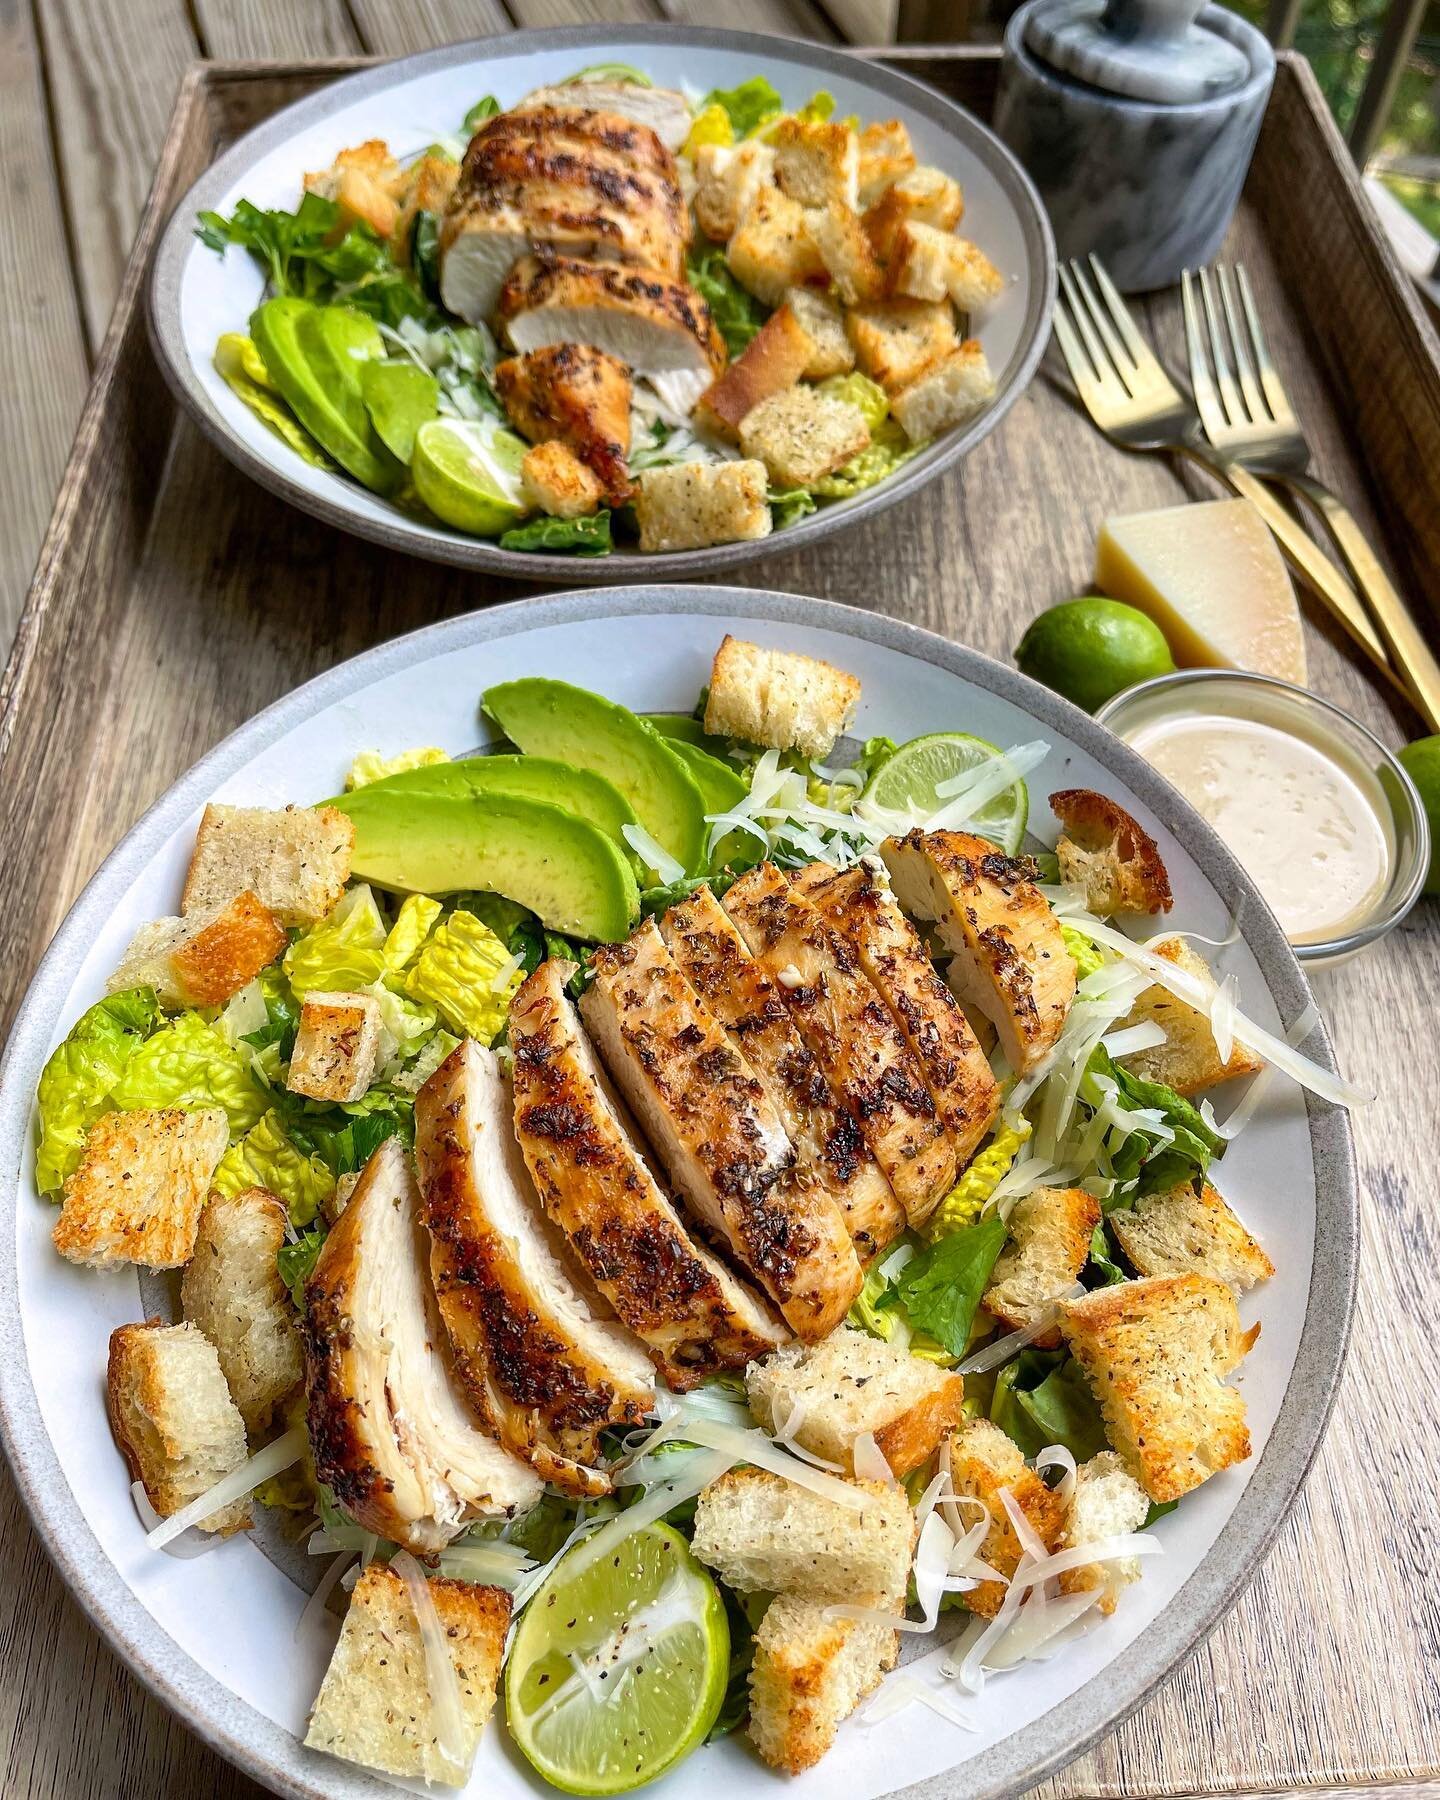 Caesar Salad with Homemade Sourdough Croutons! 😍 Home cooked food - so simple, so nourishing, so good! The chicken breast is insanely juicy and delicious! I haven&rsquo;t found a good Caesar salad in the area, so I make my own and it&rsquo;s 💯 ! 

